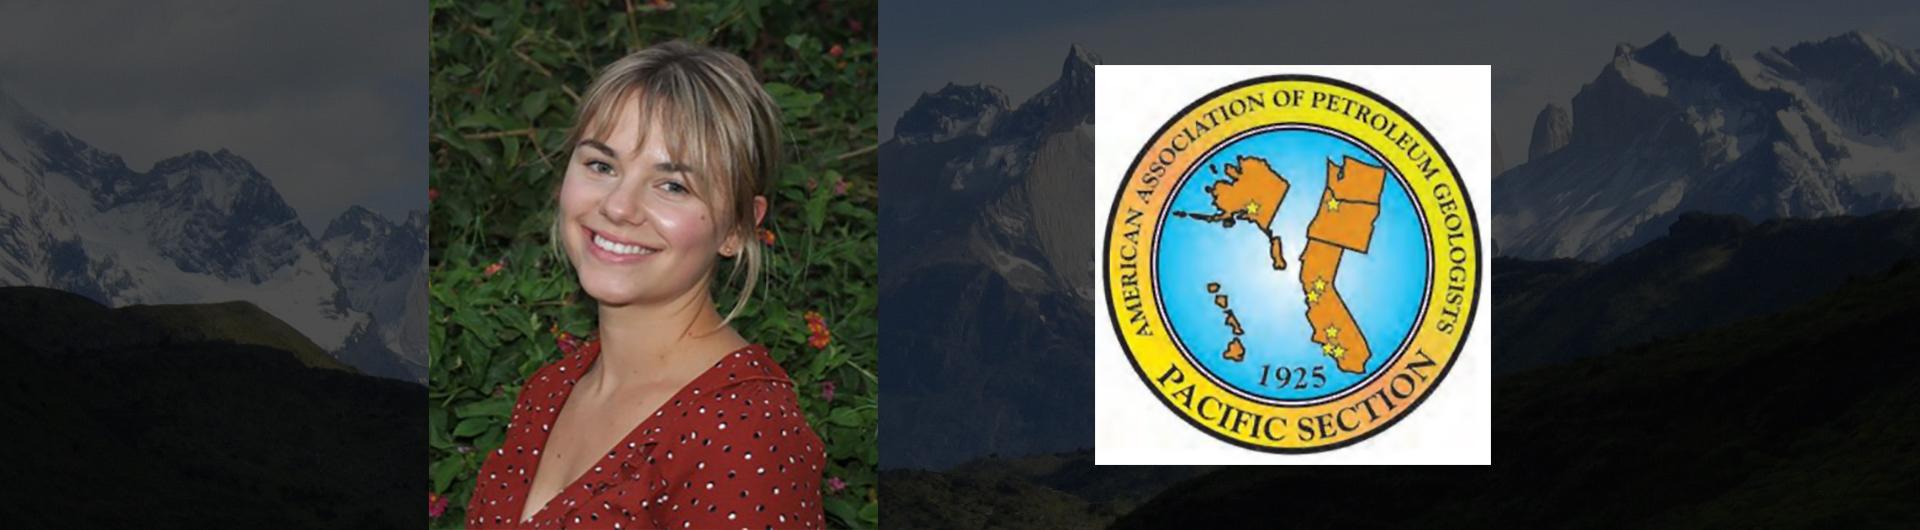 Megan Mortimer-Lamb and the Pacific Section of the American Assoiation of Petroleum Geologists